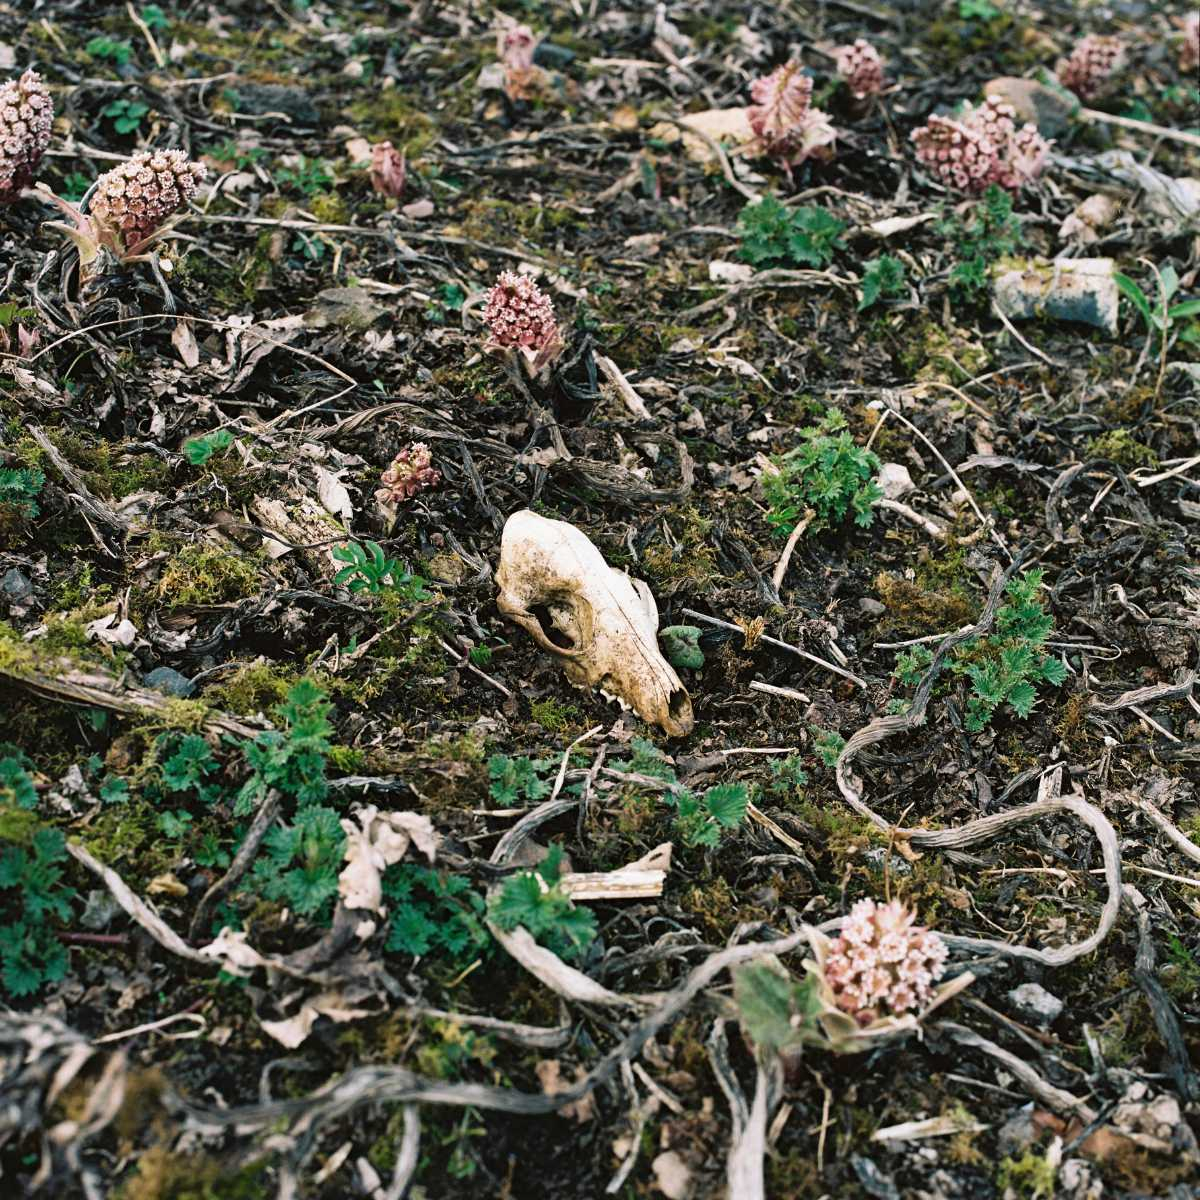 A film photograph of the former Michael Colliery landscape with a rabbit's skull and surrounding butterbur flowers 